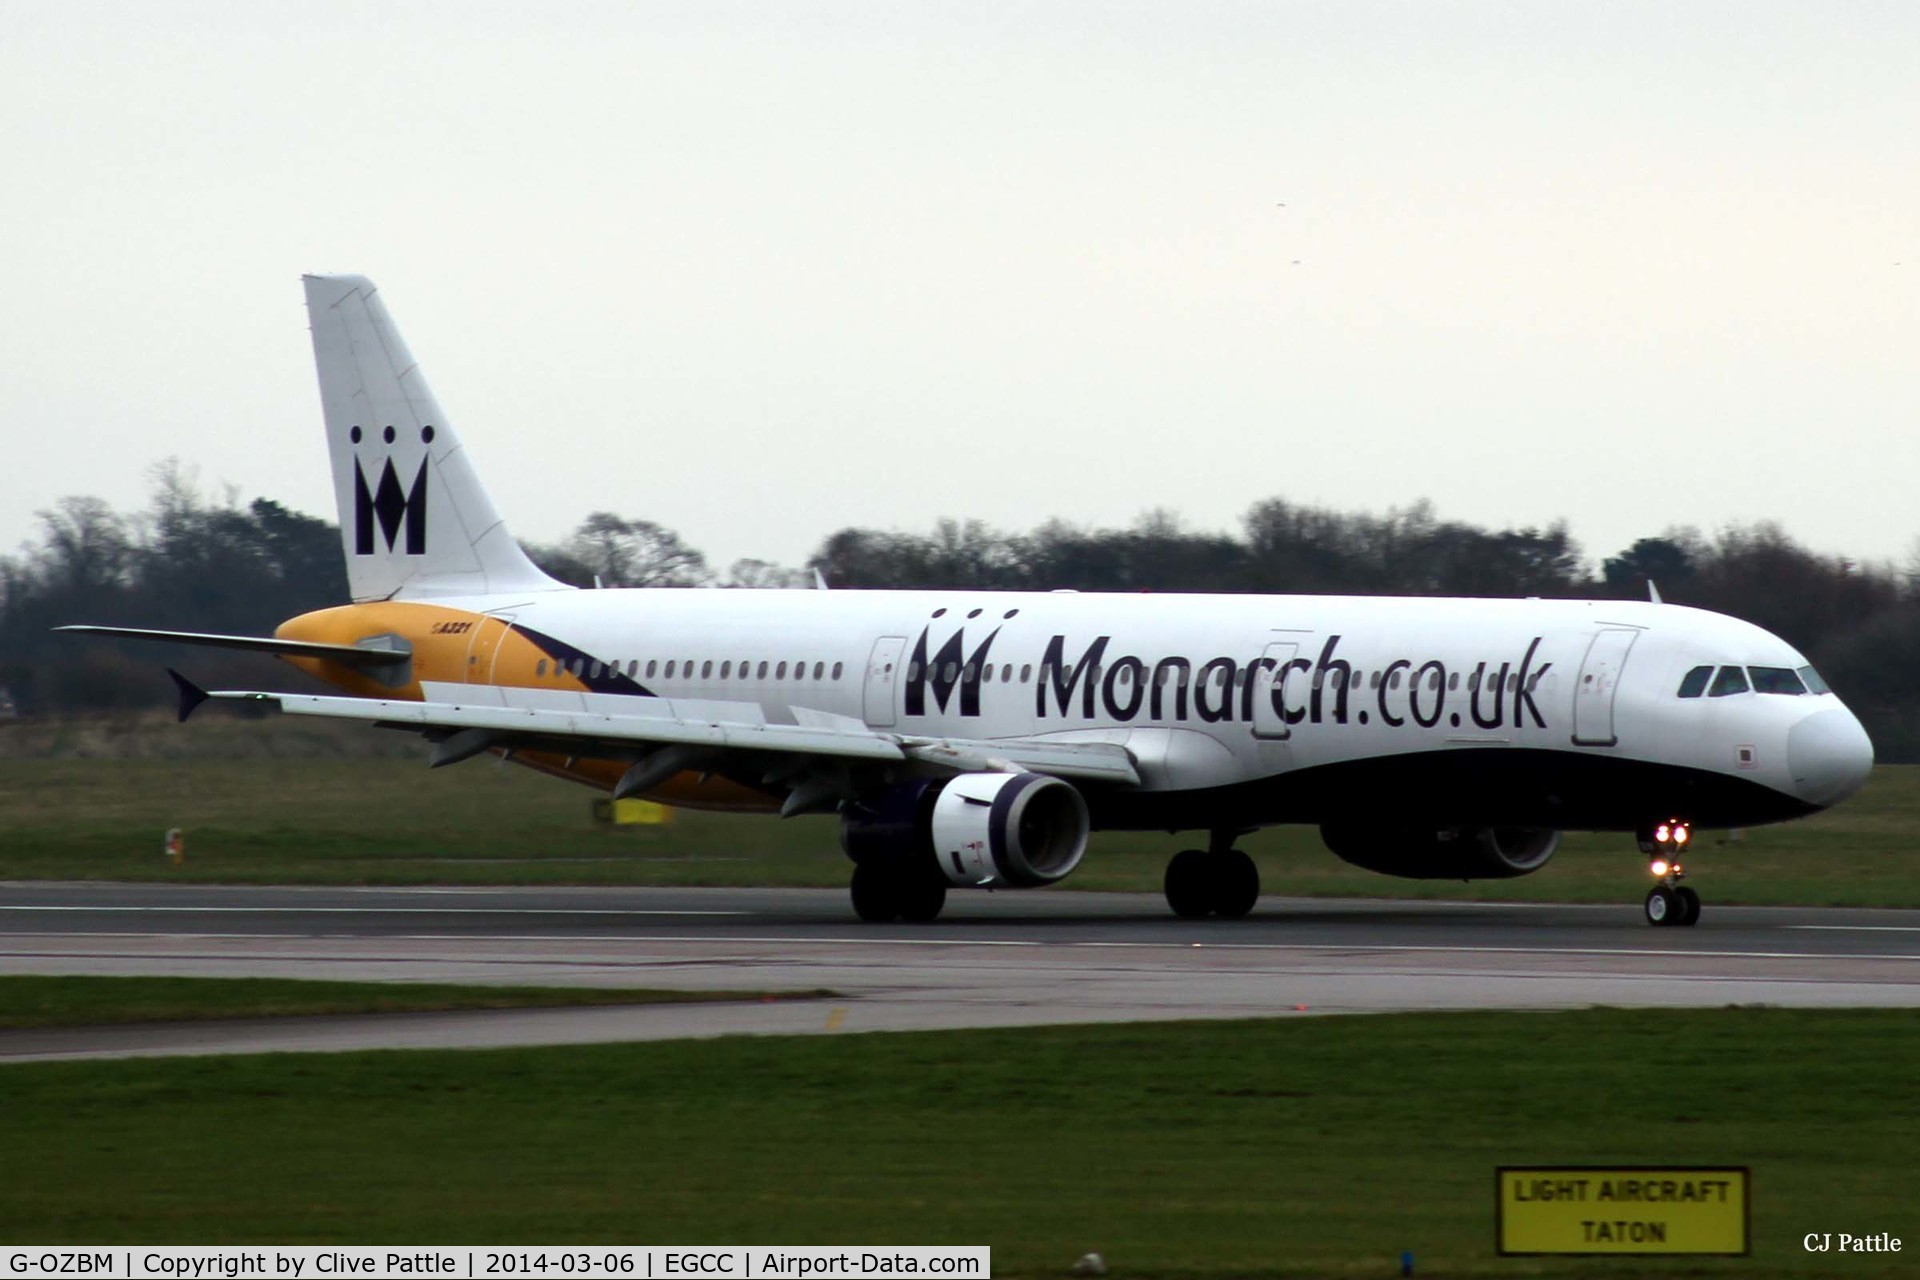 G-OZBM, 1999 Airbus A321-231 C/N 1045, In action at Manchester